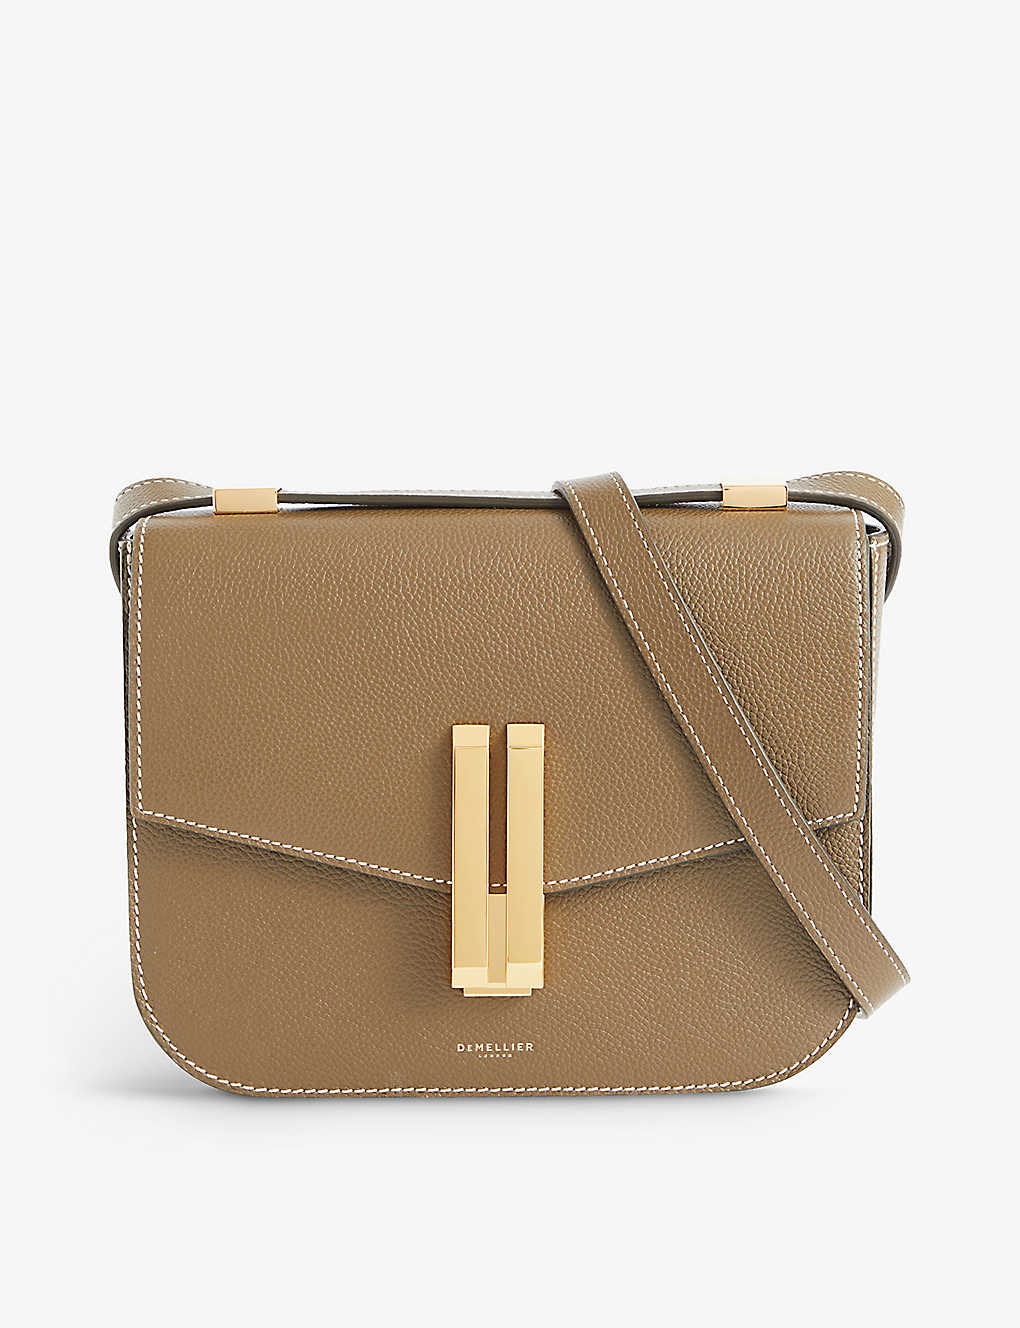 Demellier The Vancouver Leather Cross-body Bag In Olive W/ecru Stitch